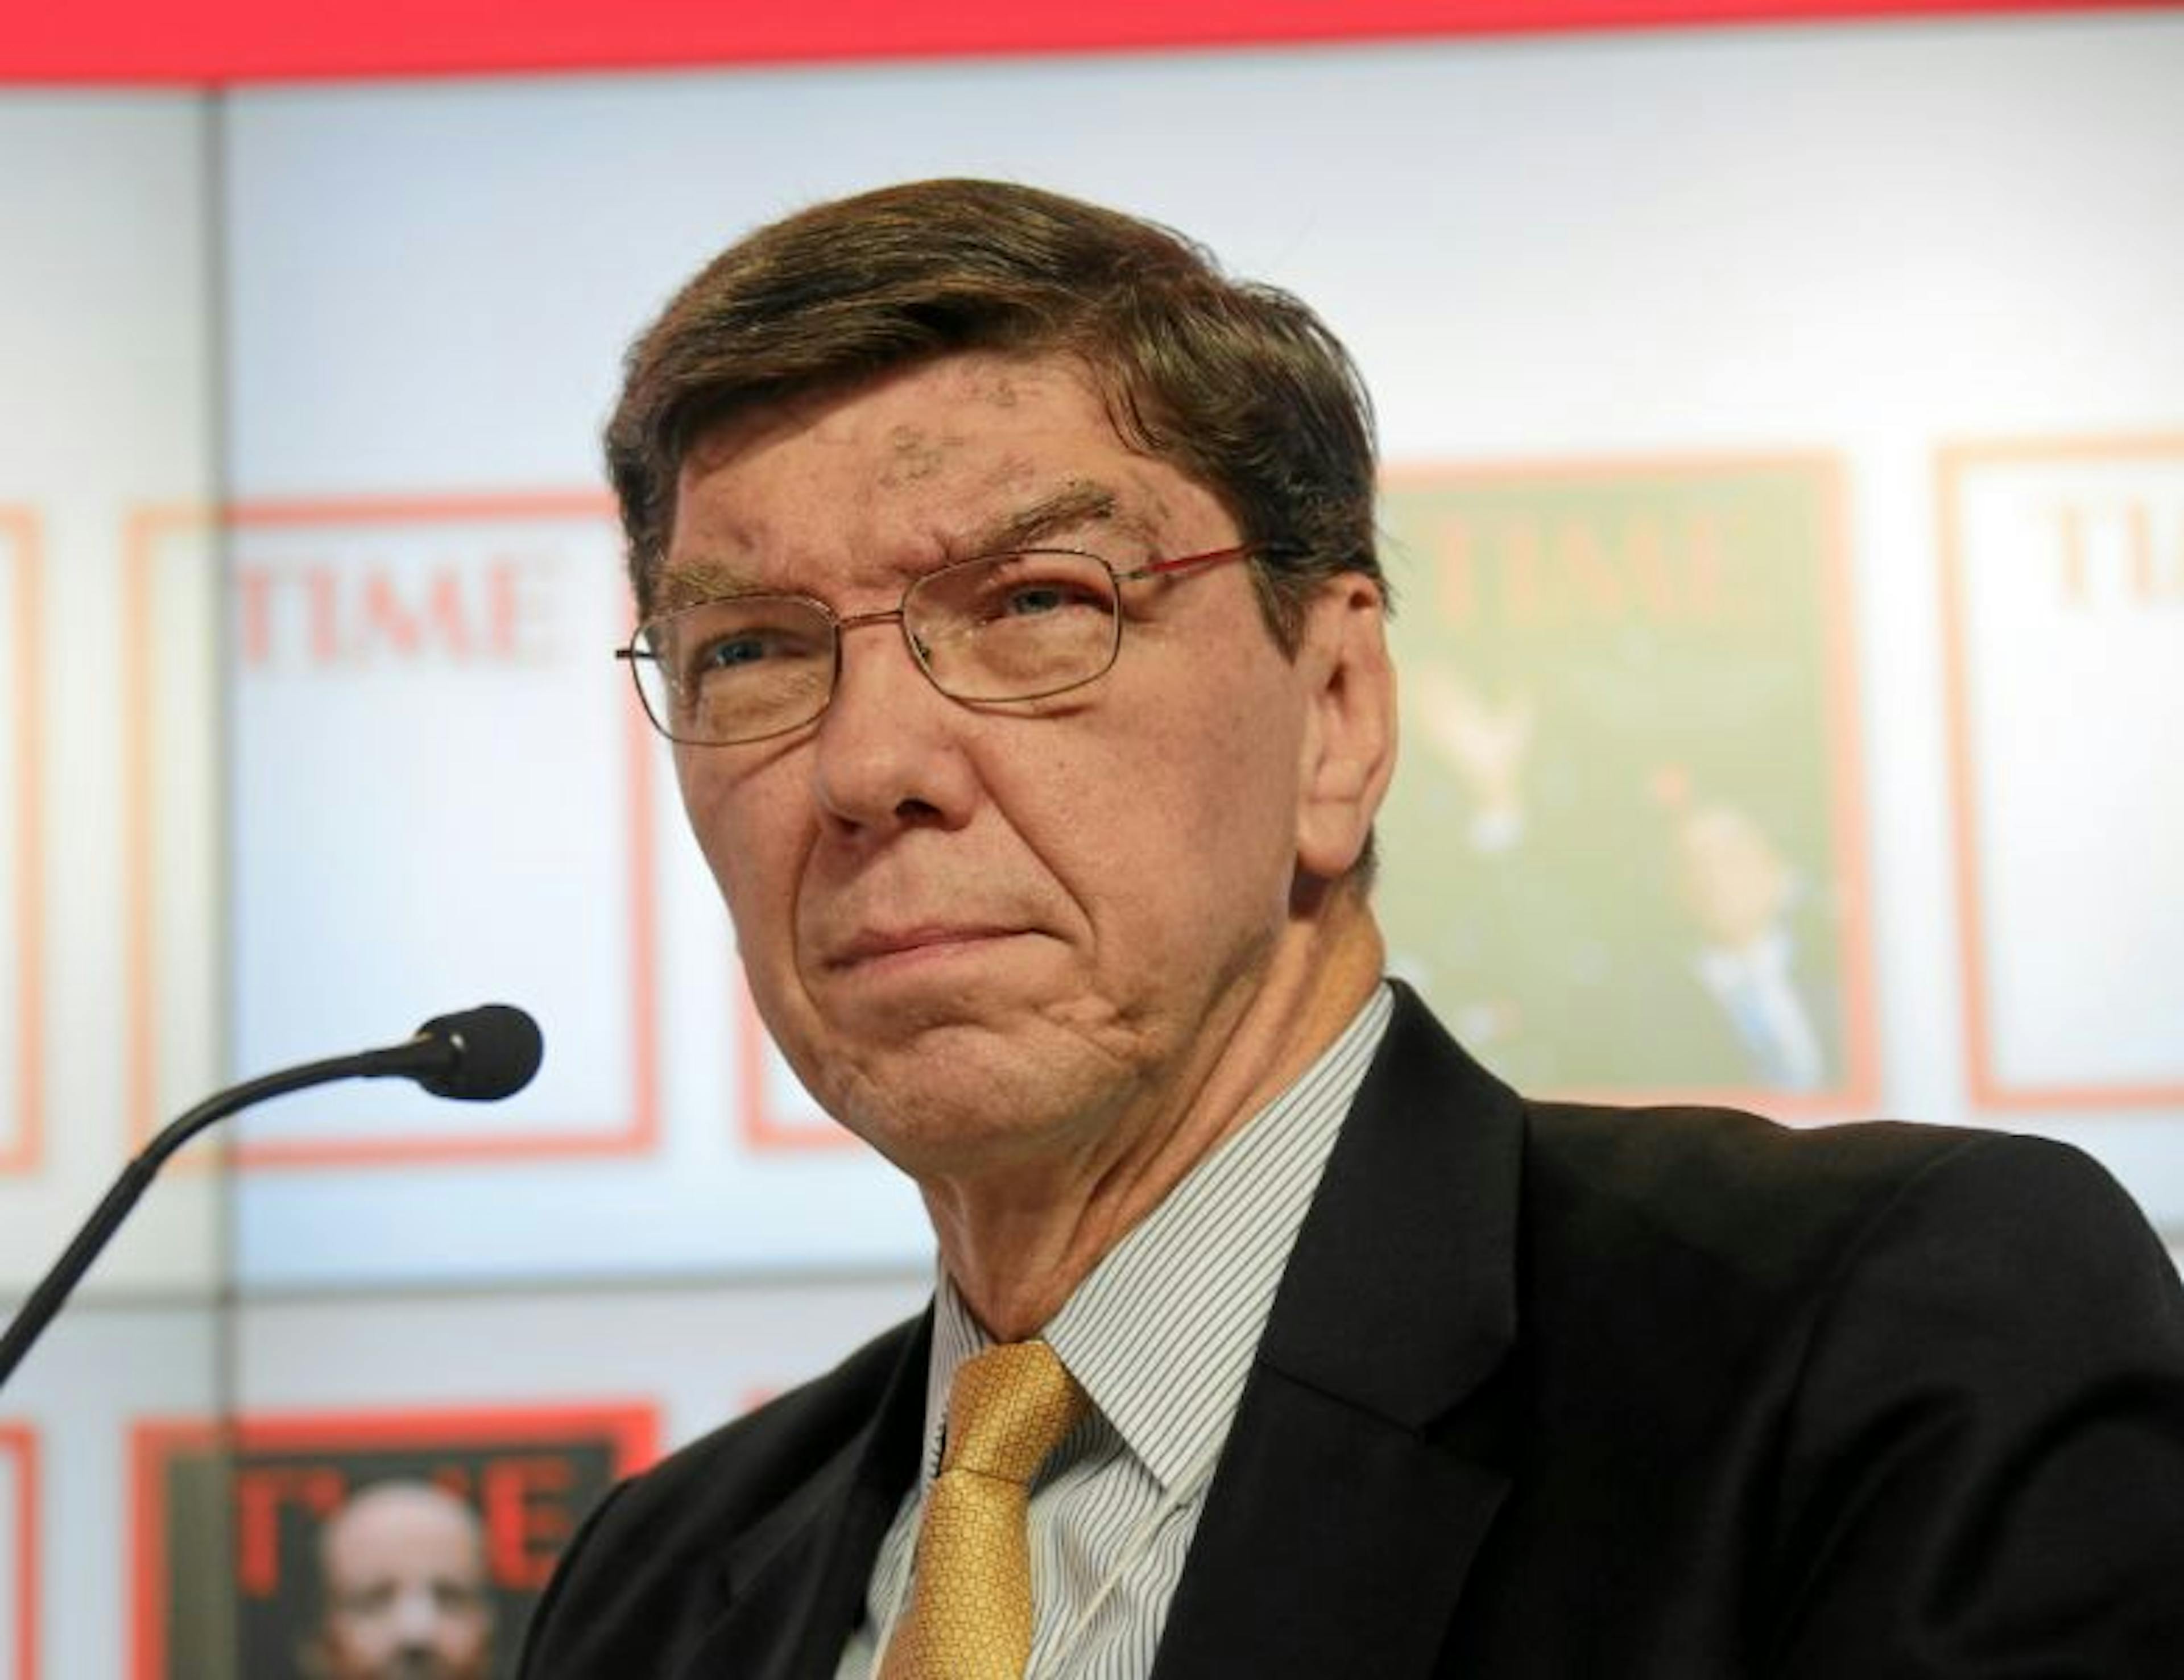 /8-lessons-product-managers-need-to-learn-from-clayton-christensen-1f8836vc feature image